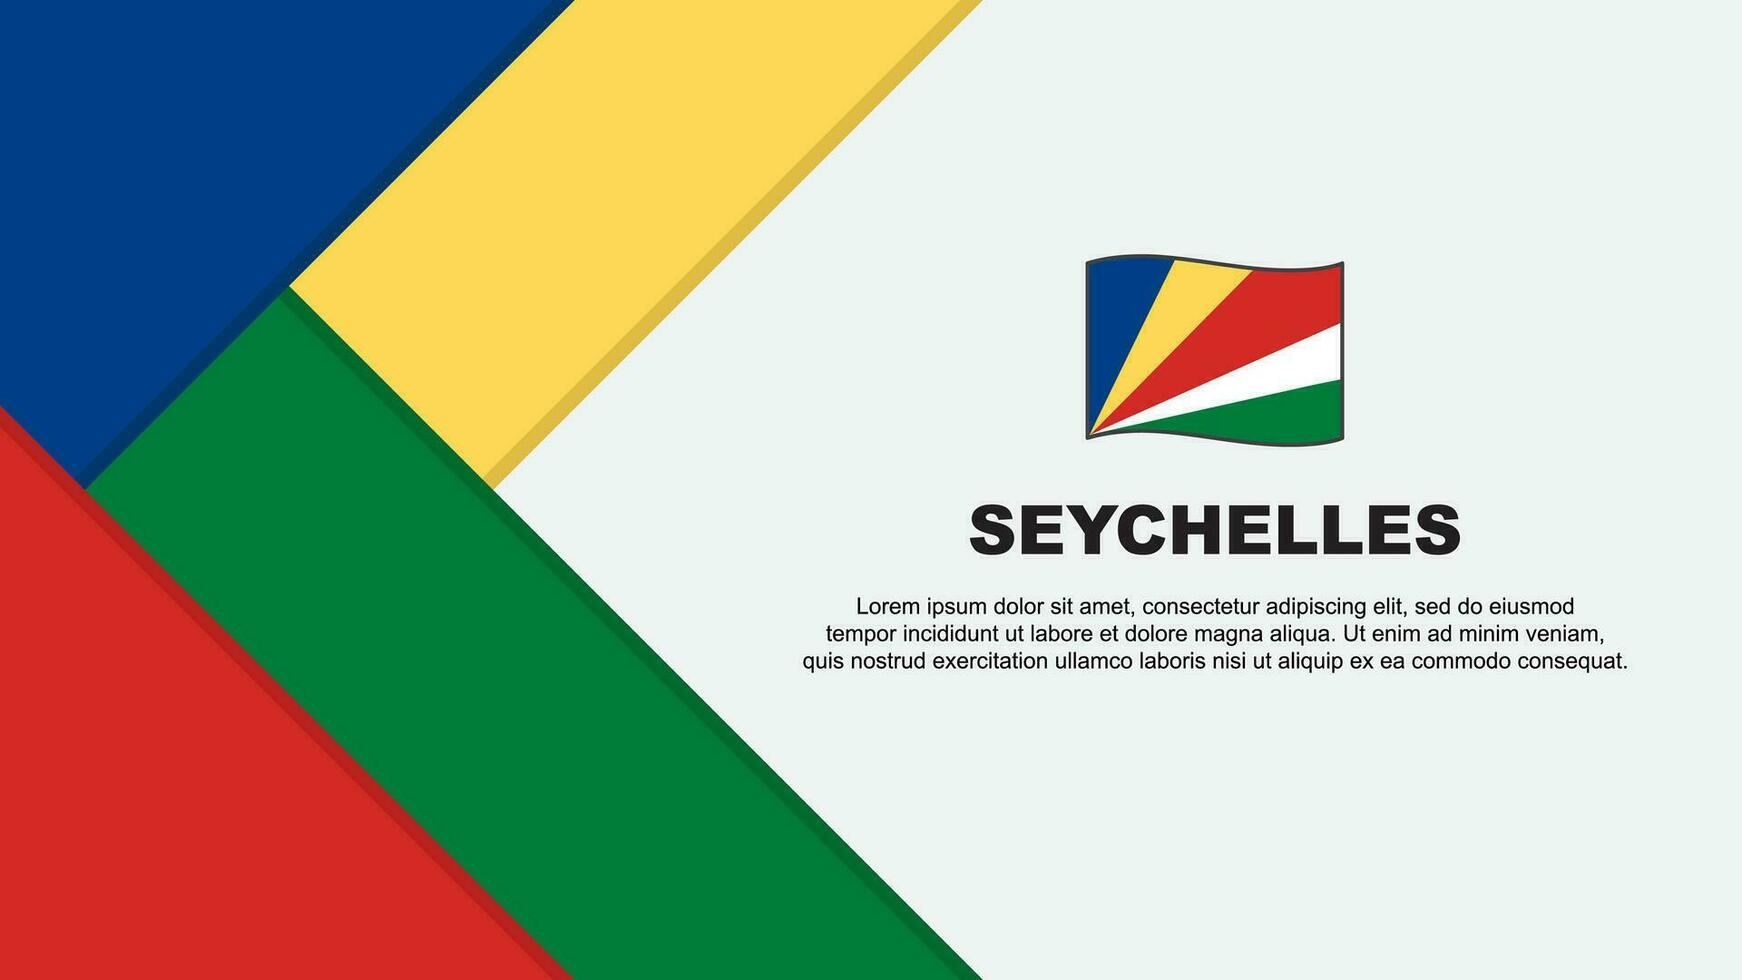 Seychelles Flag Abstract Background Design Template. Seychelles Independence Day Banner Cartoon Vector Illustration. Seychelles Illustration